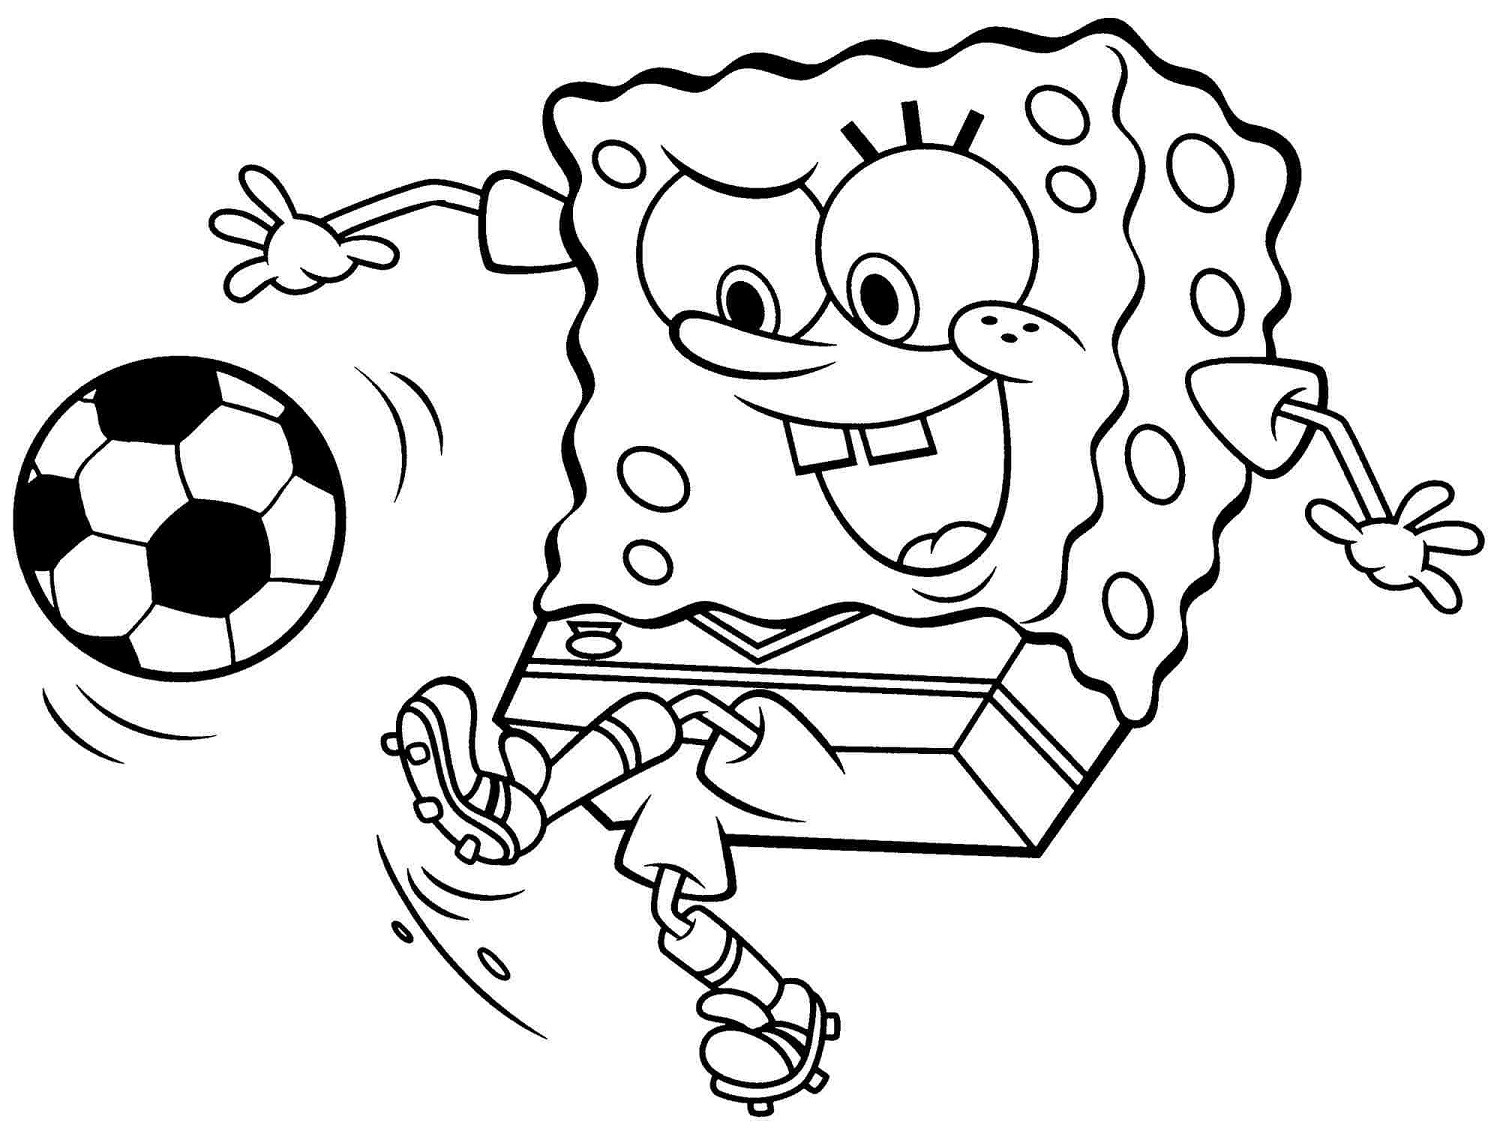 Printable Coloring Pages For Boys Soccre
 Football Coloring Pages for Kids Fun Coloring